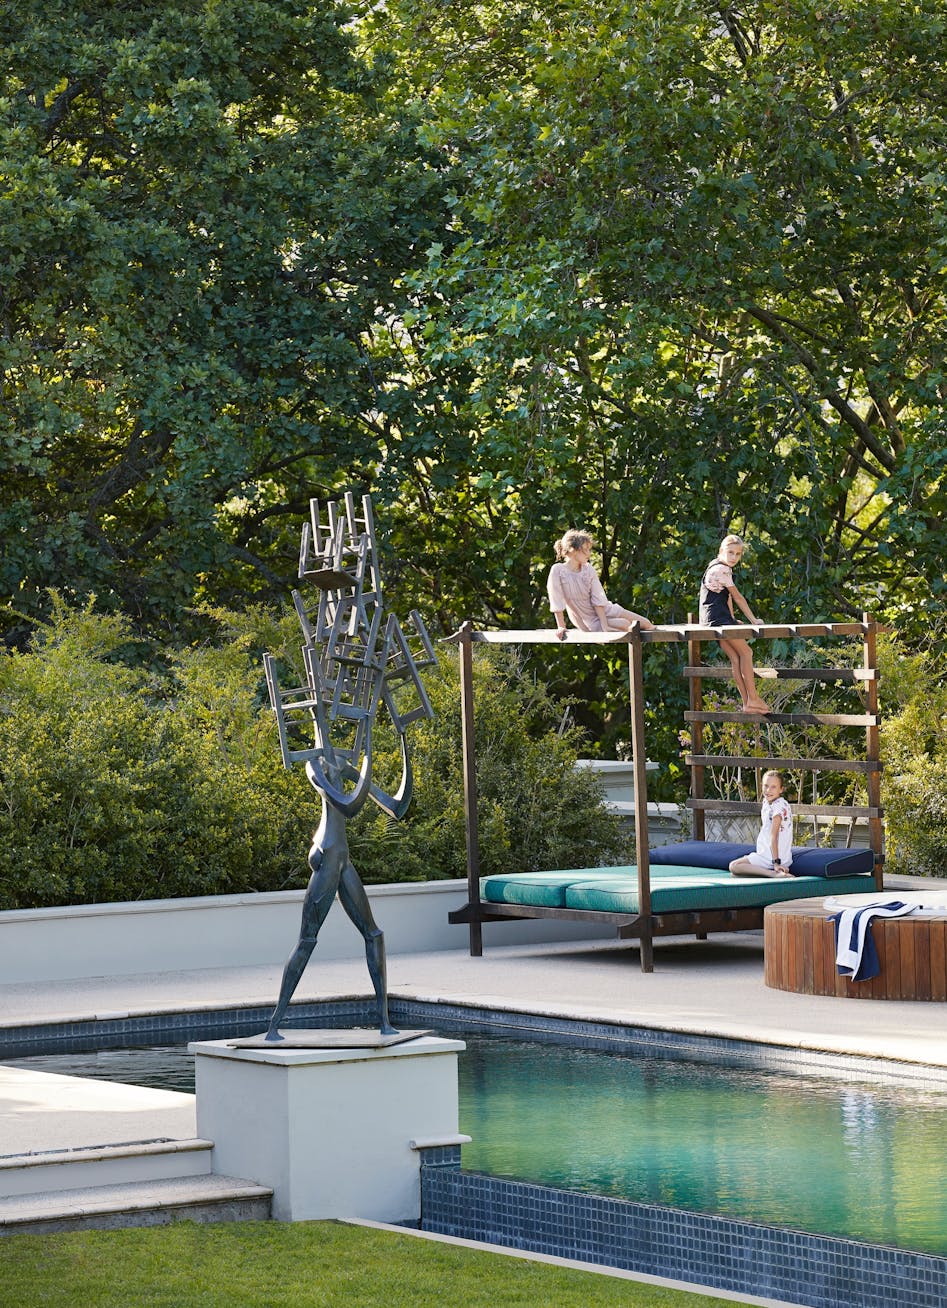 A contemporary sculpture beside an outdoor swimming pool in the foreground and children seated on a 4-poster daybed in the background.